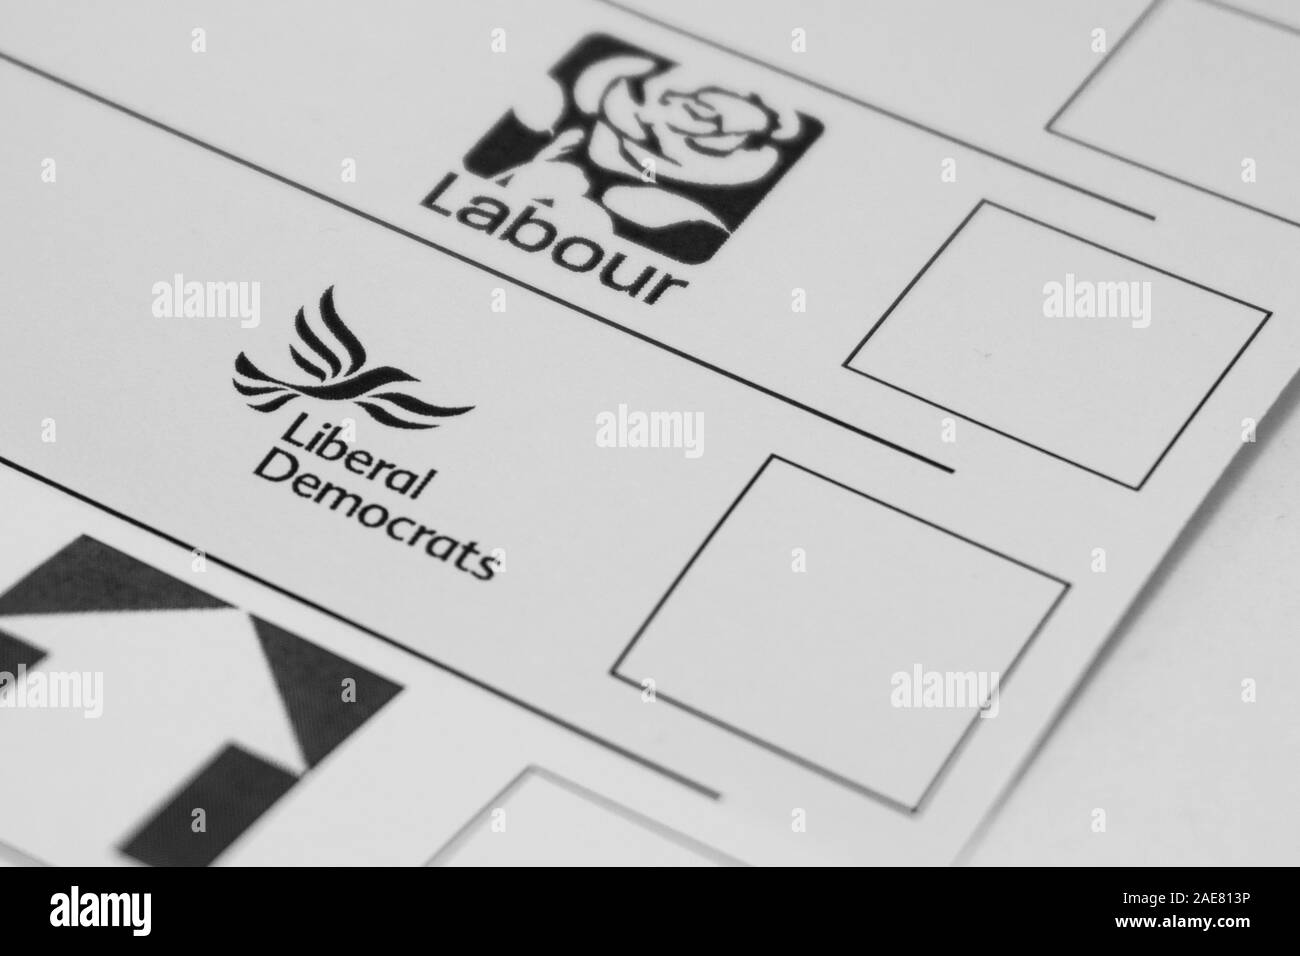 London / United Kingdom - December 7th 2019: Labour and liberal democrats on general election ballot paper Stock Photo